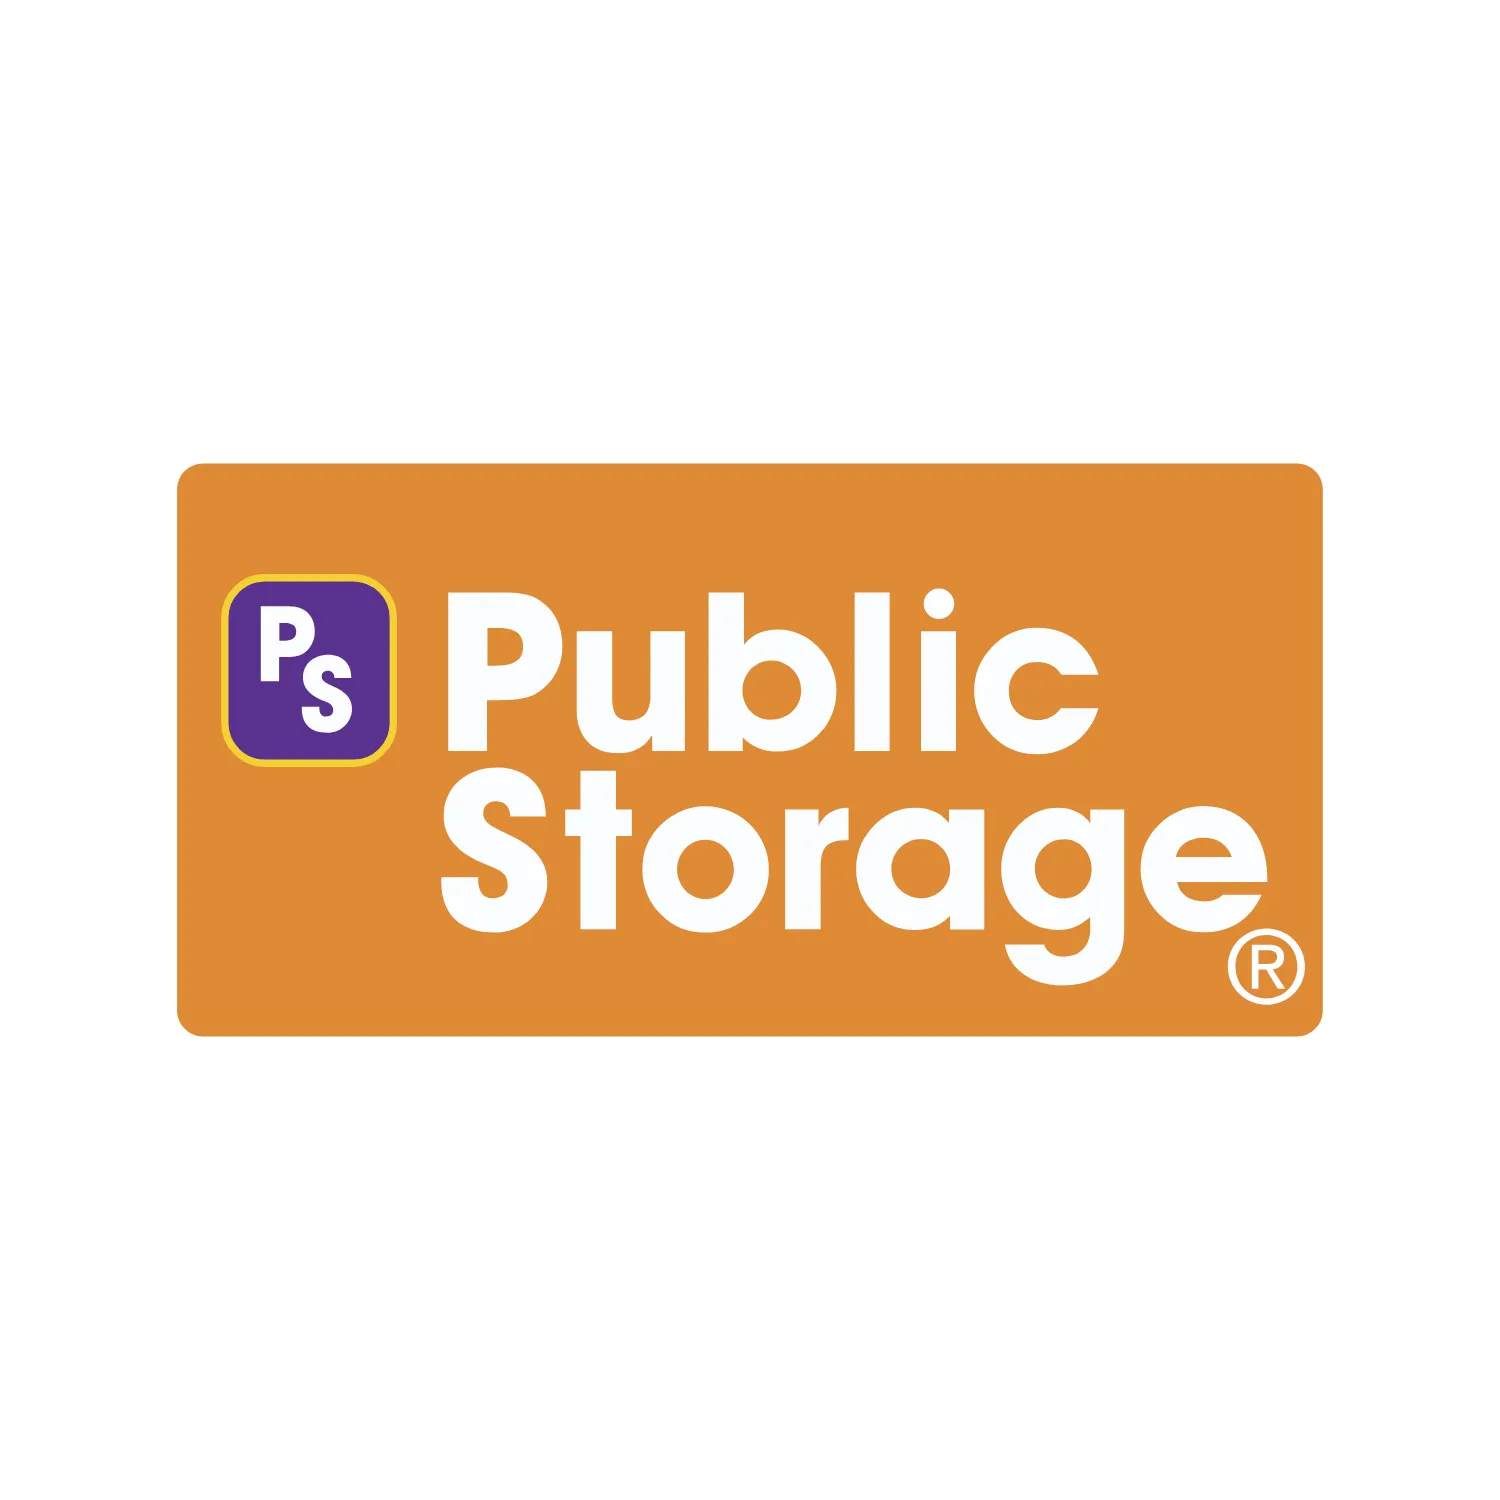 Database of Public Storage Locations in the United States